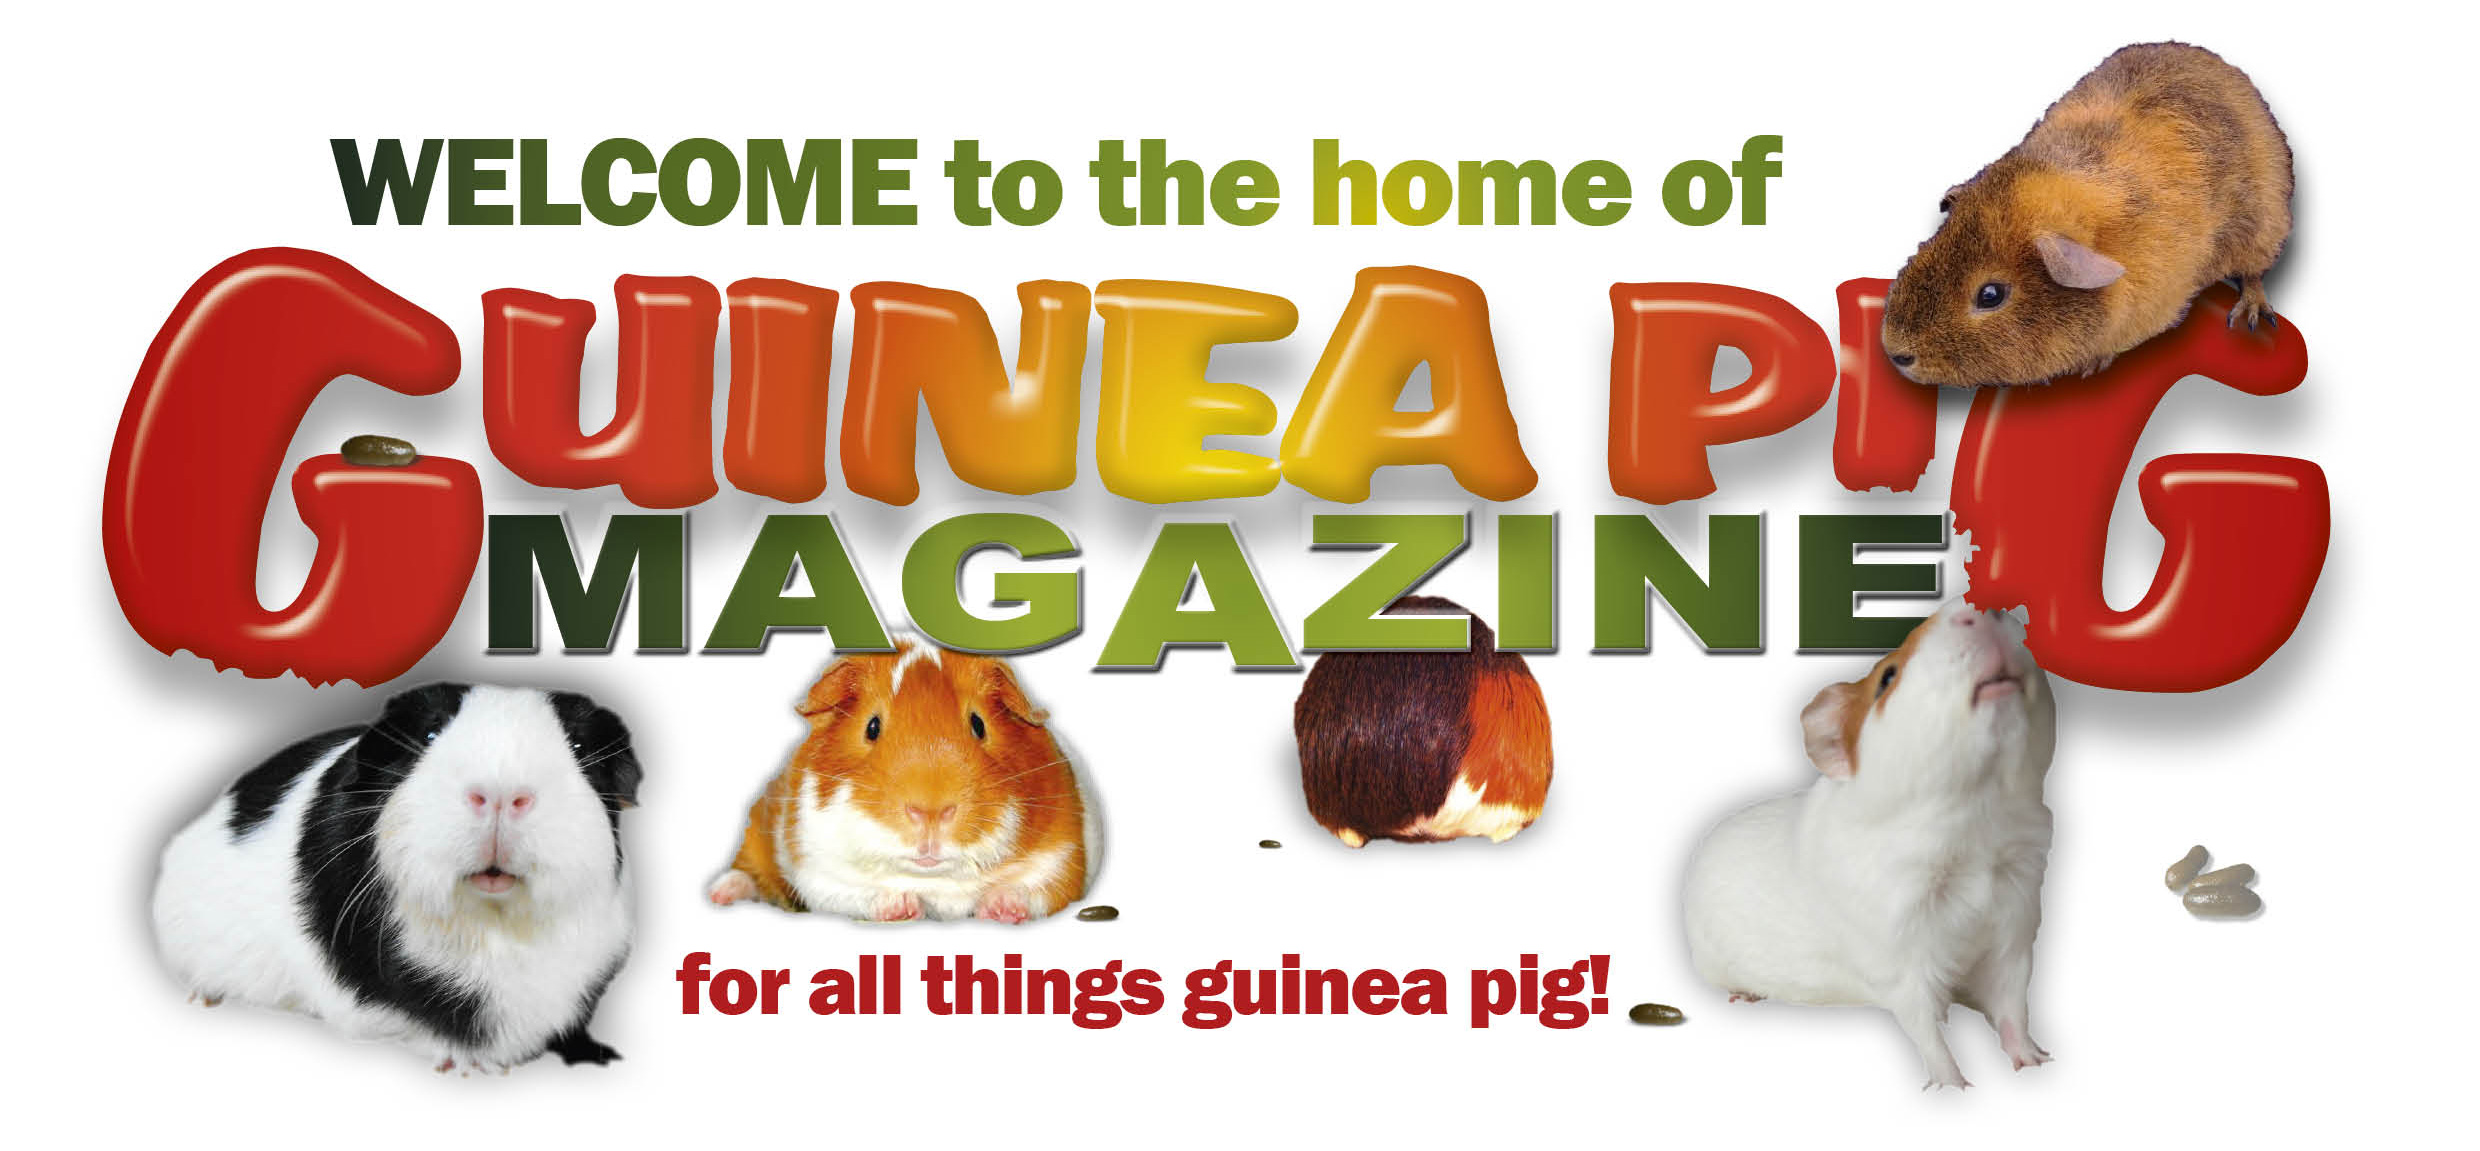 Amazing Guinea Pig Pictures & Backgrounds